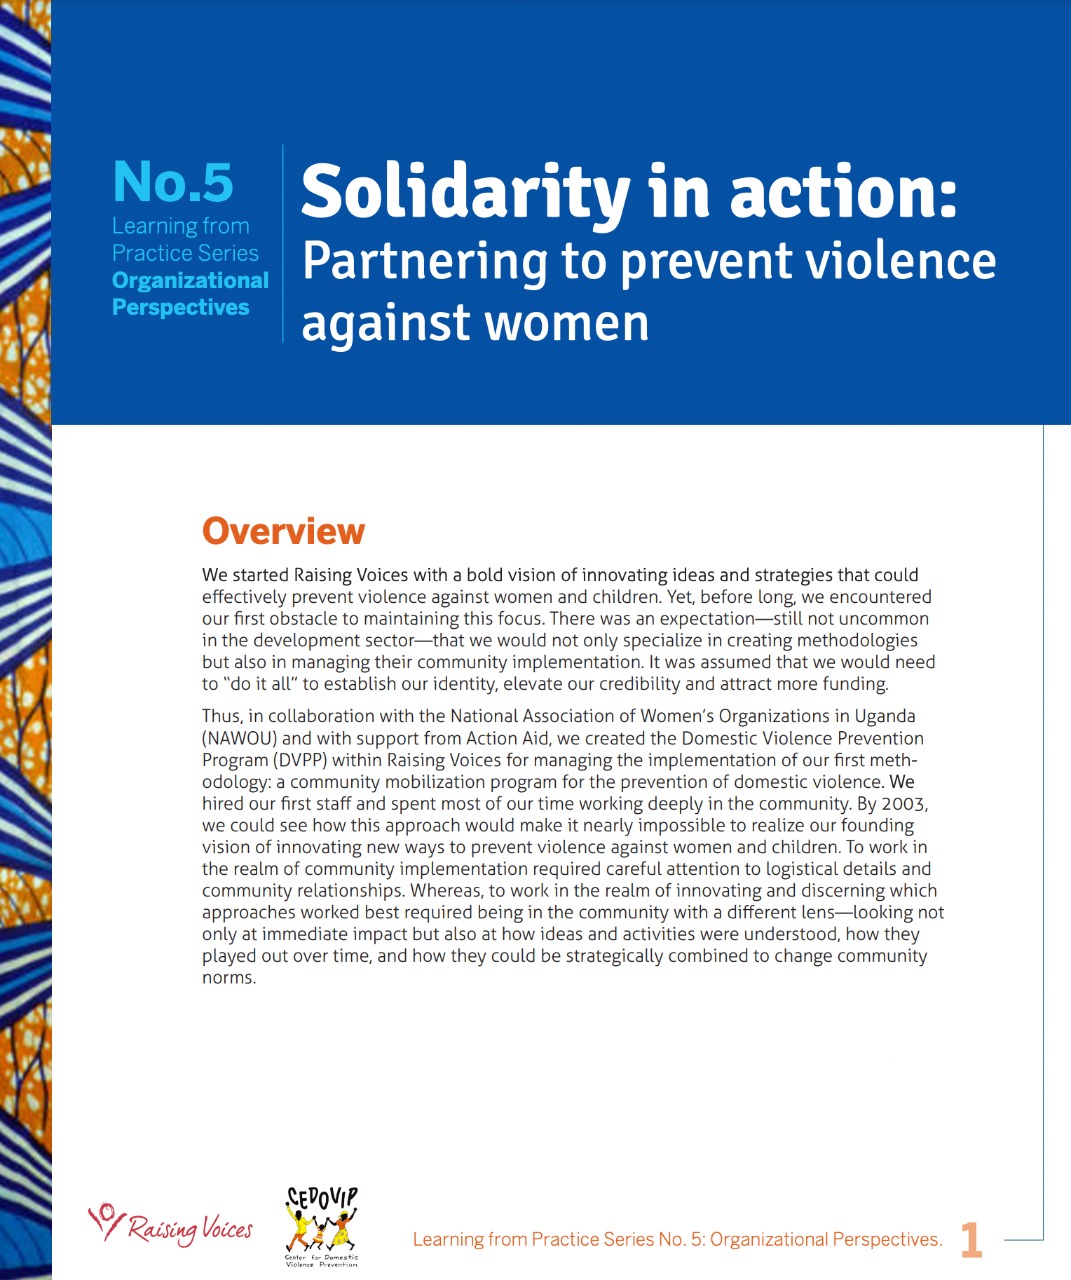 Solidarity in action: Partnering to prevent violence against women